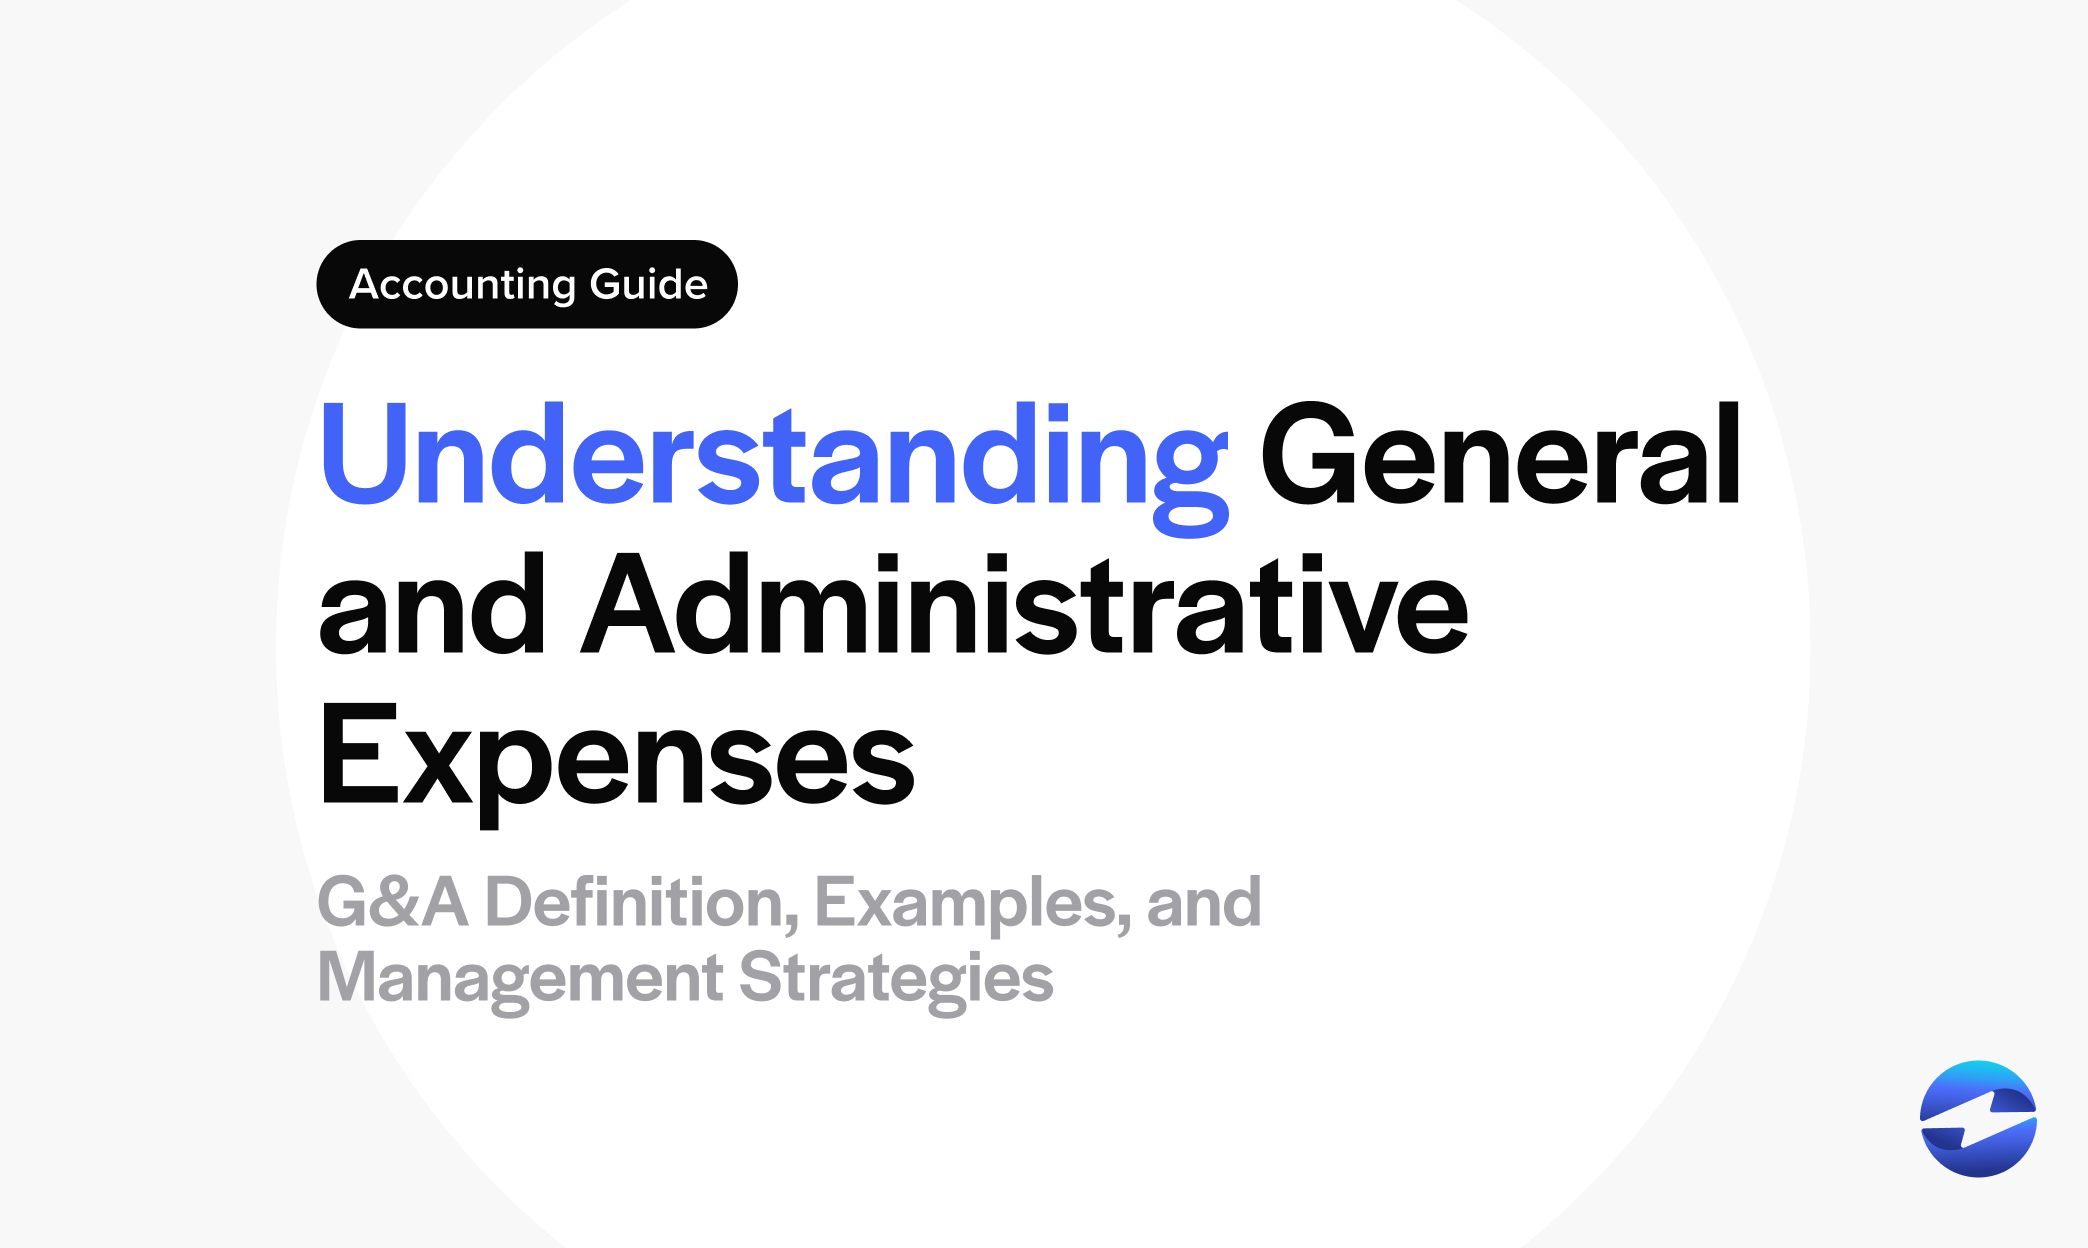 Understanding General and Administrative Expenses (G&A)- Definition, Examples, and Management Strategies